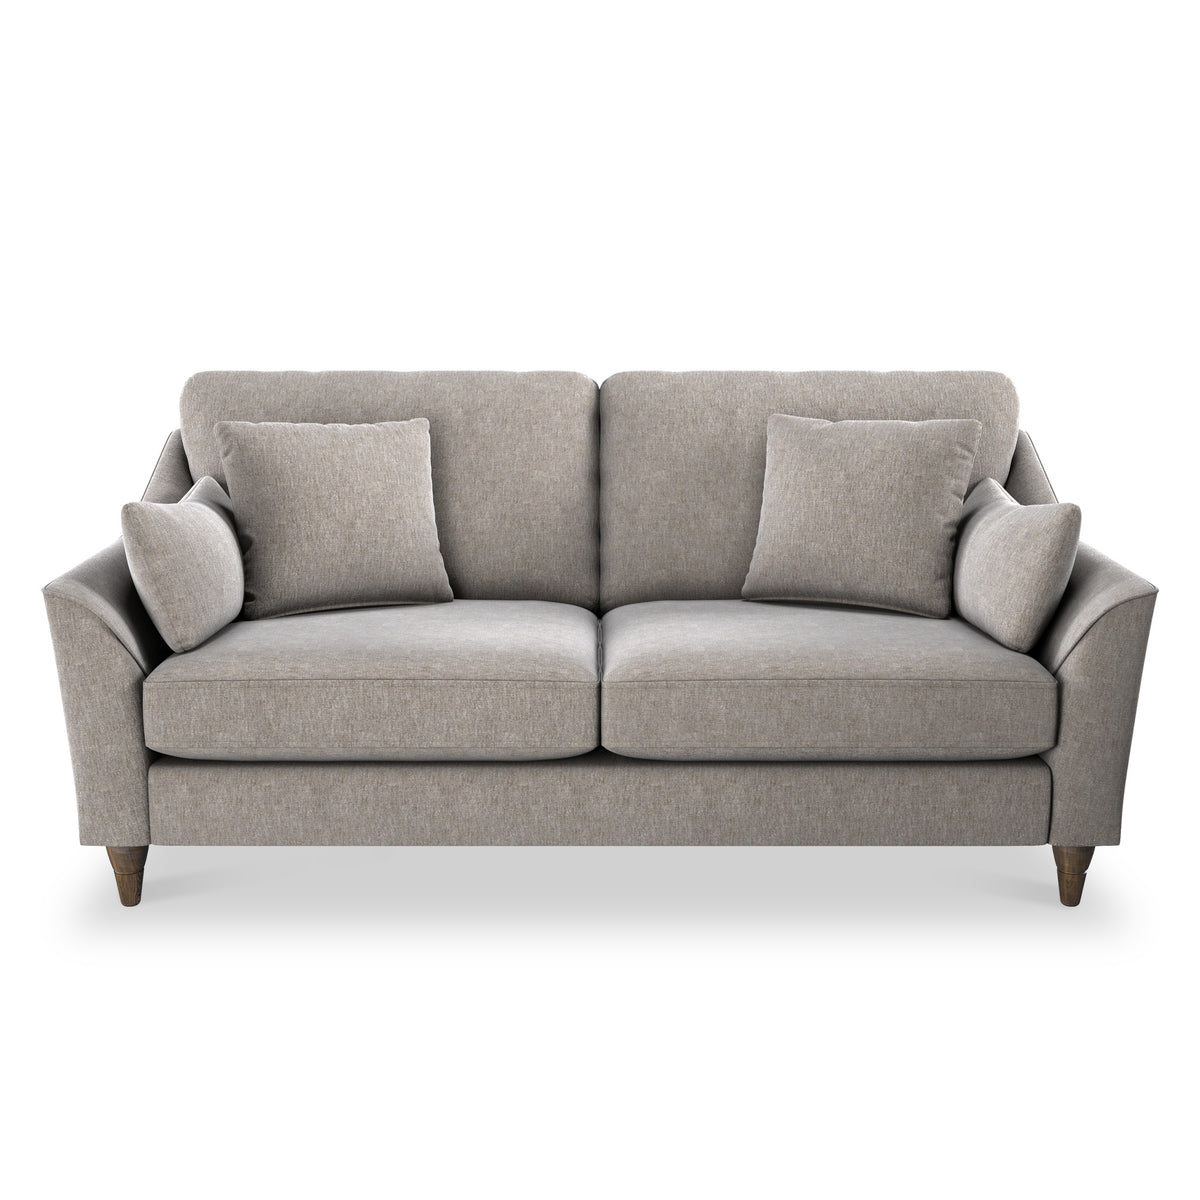 Charice Fog Grey 2 Seater couch